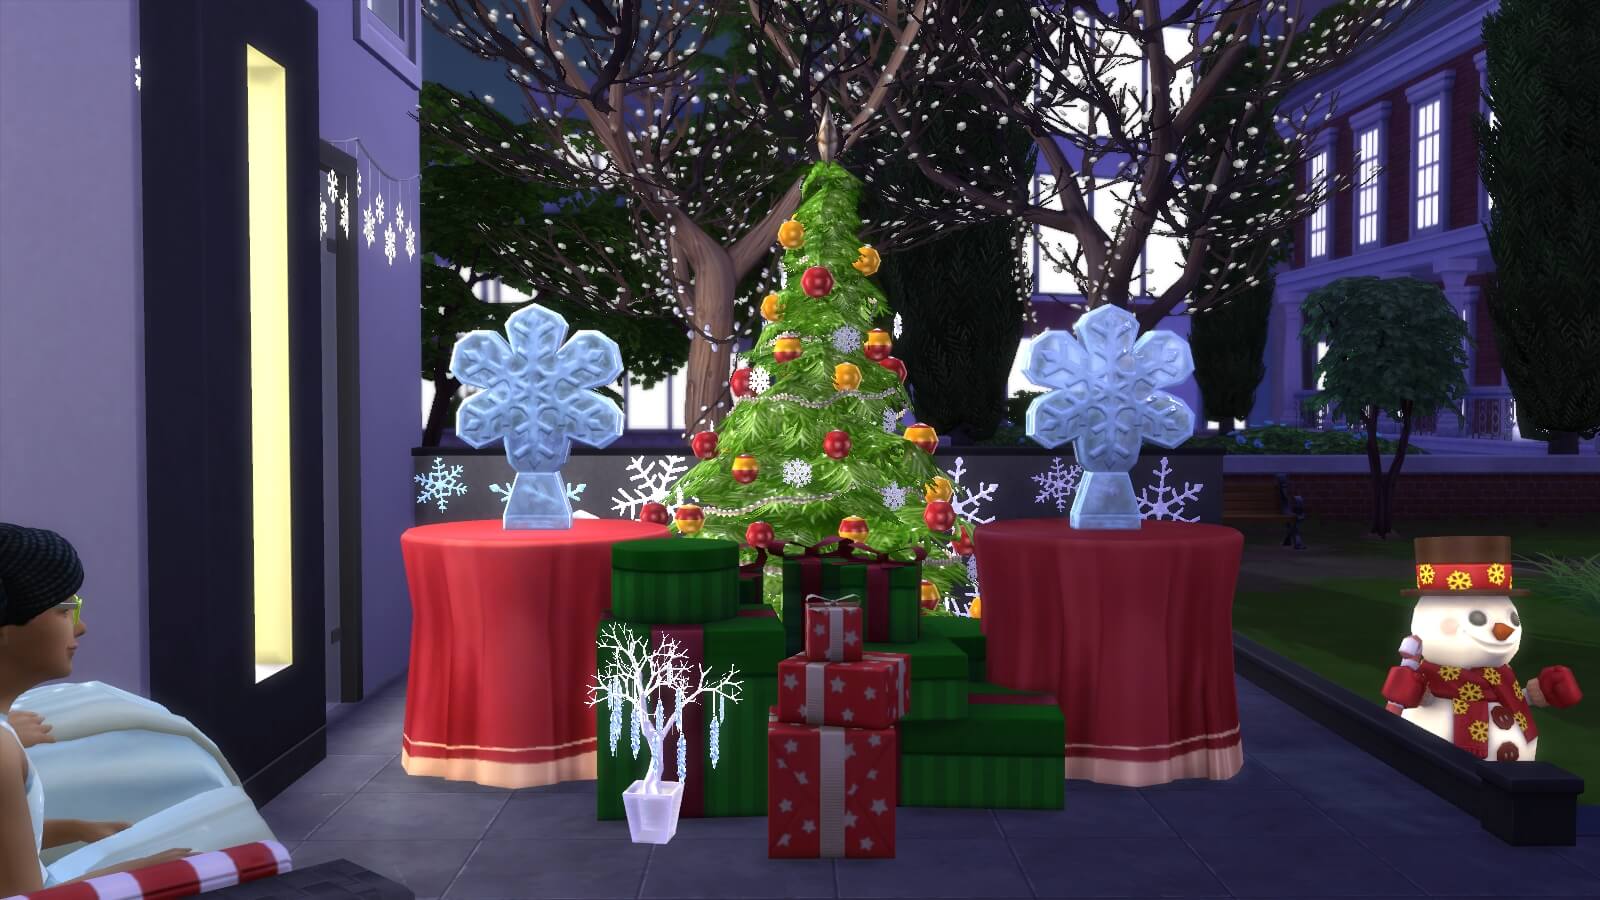 Sims 4: Holiday Celebration Pack Expands with New Items